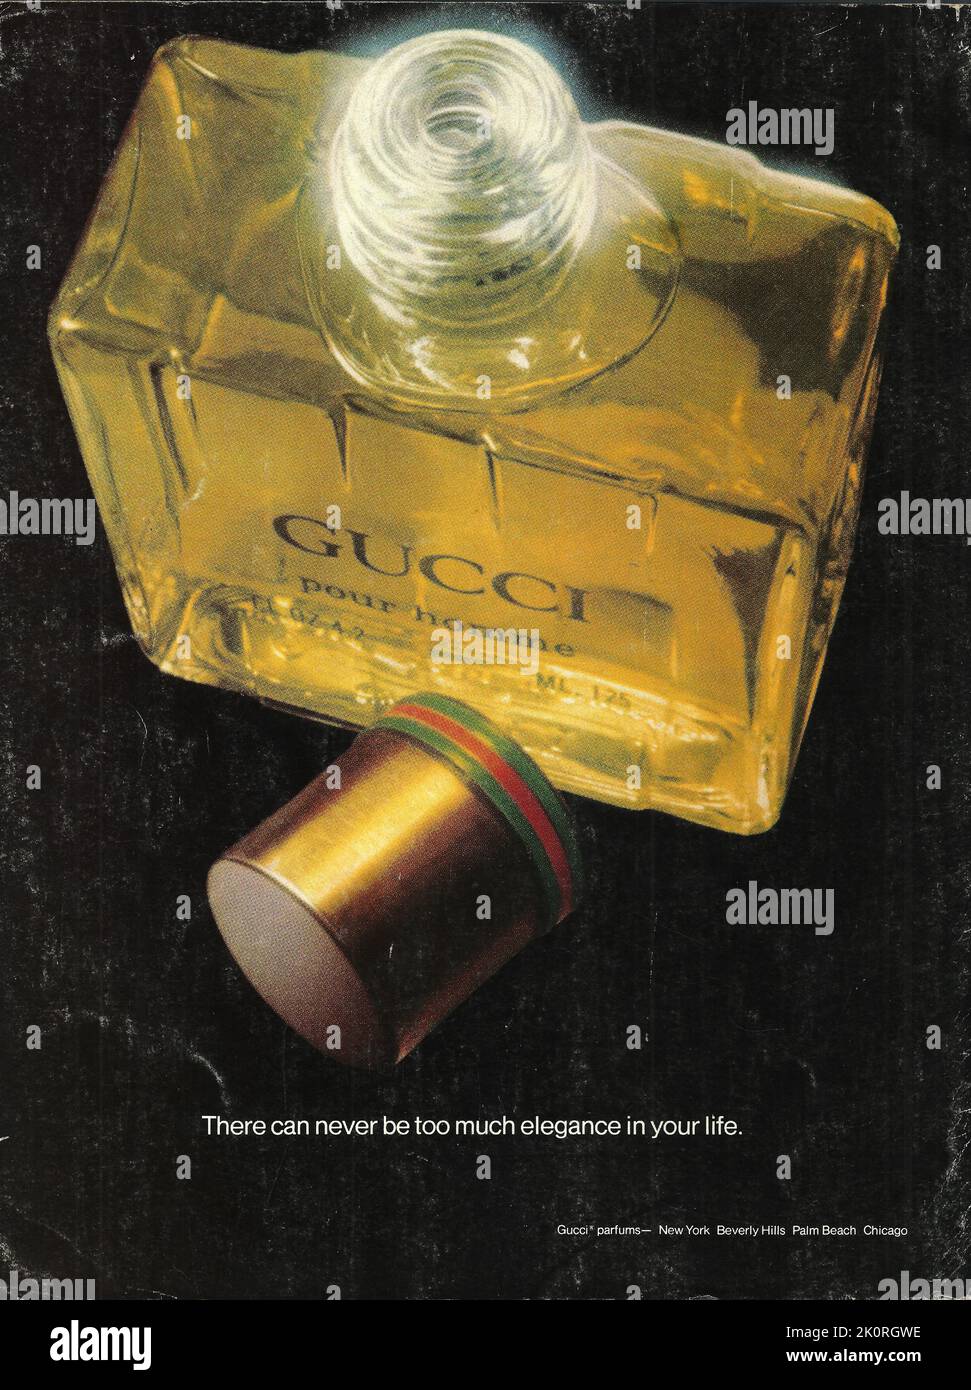 Try These Niche Fragrances This Fall. Review Of Alluring Best-sellers  Perfumes Number 1 On The